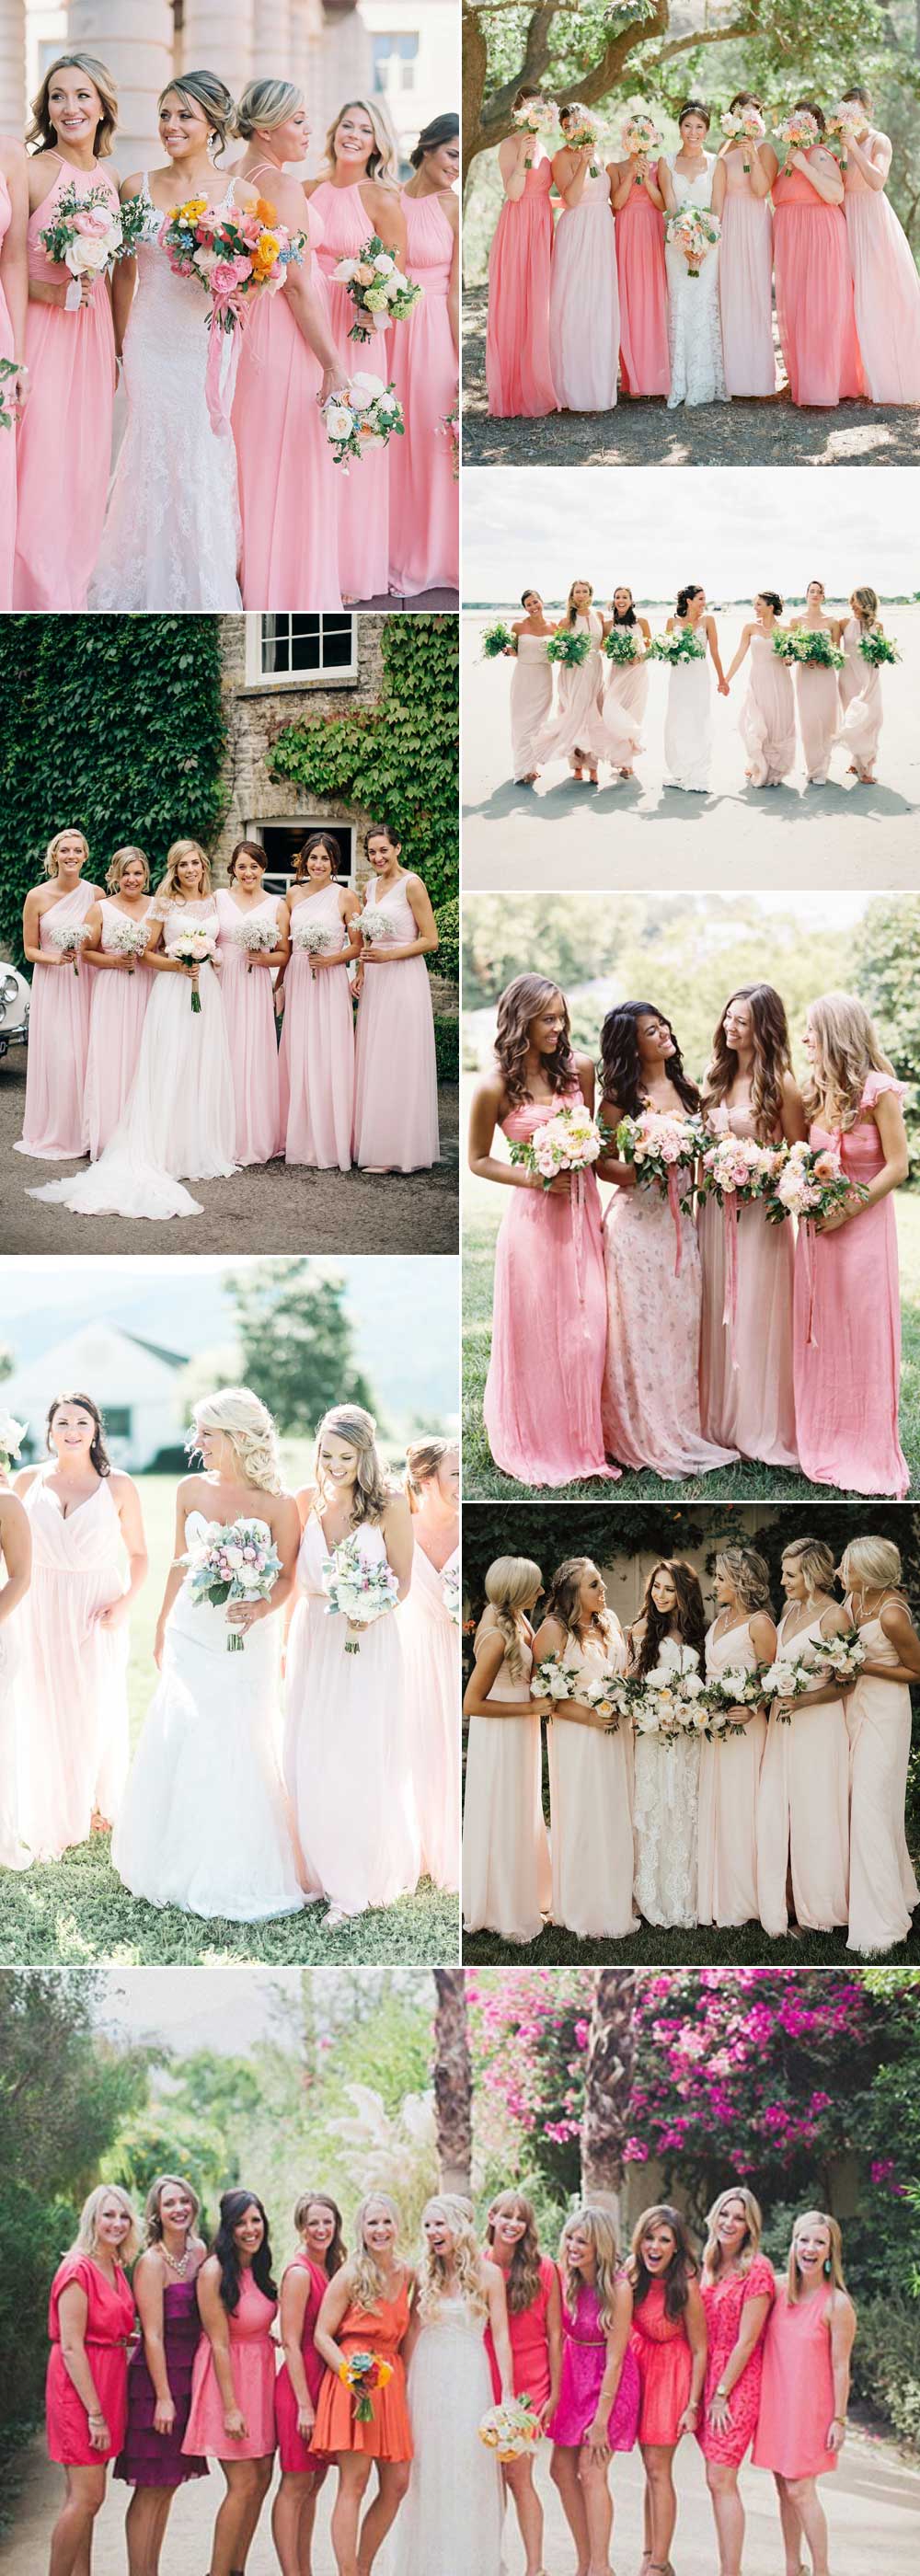 Pink bridesmaid dress ideas in blush, rose and cerise